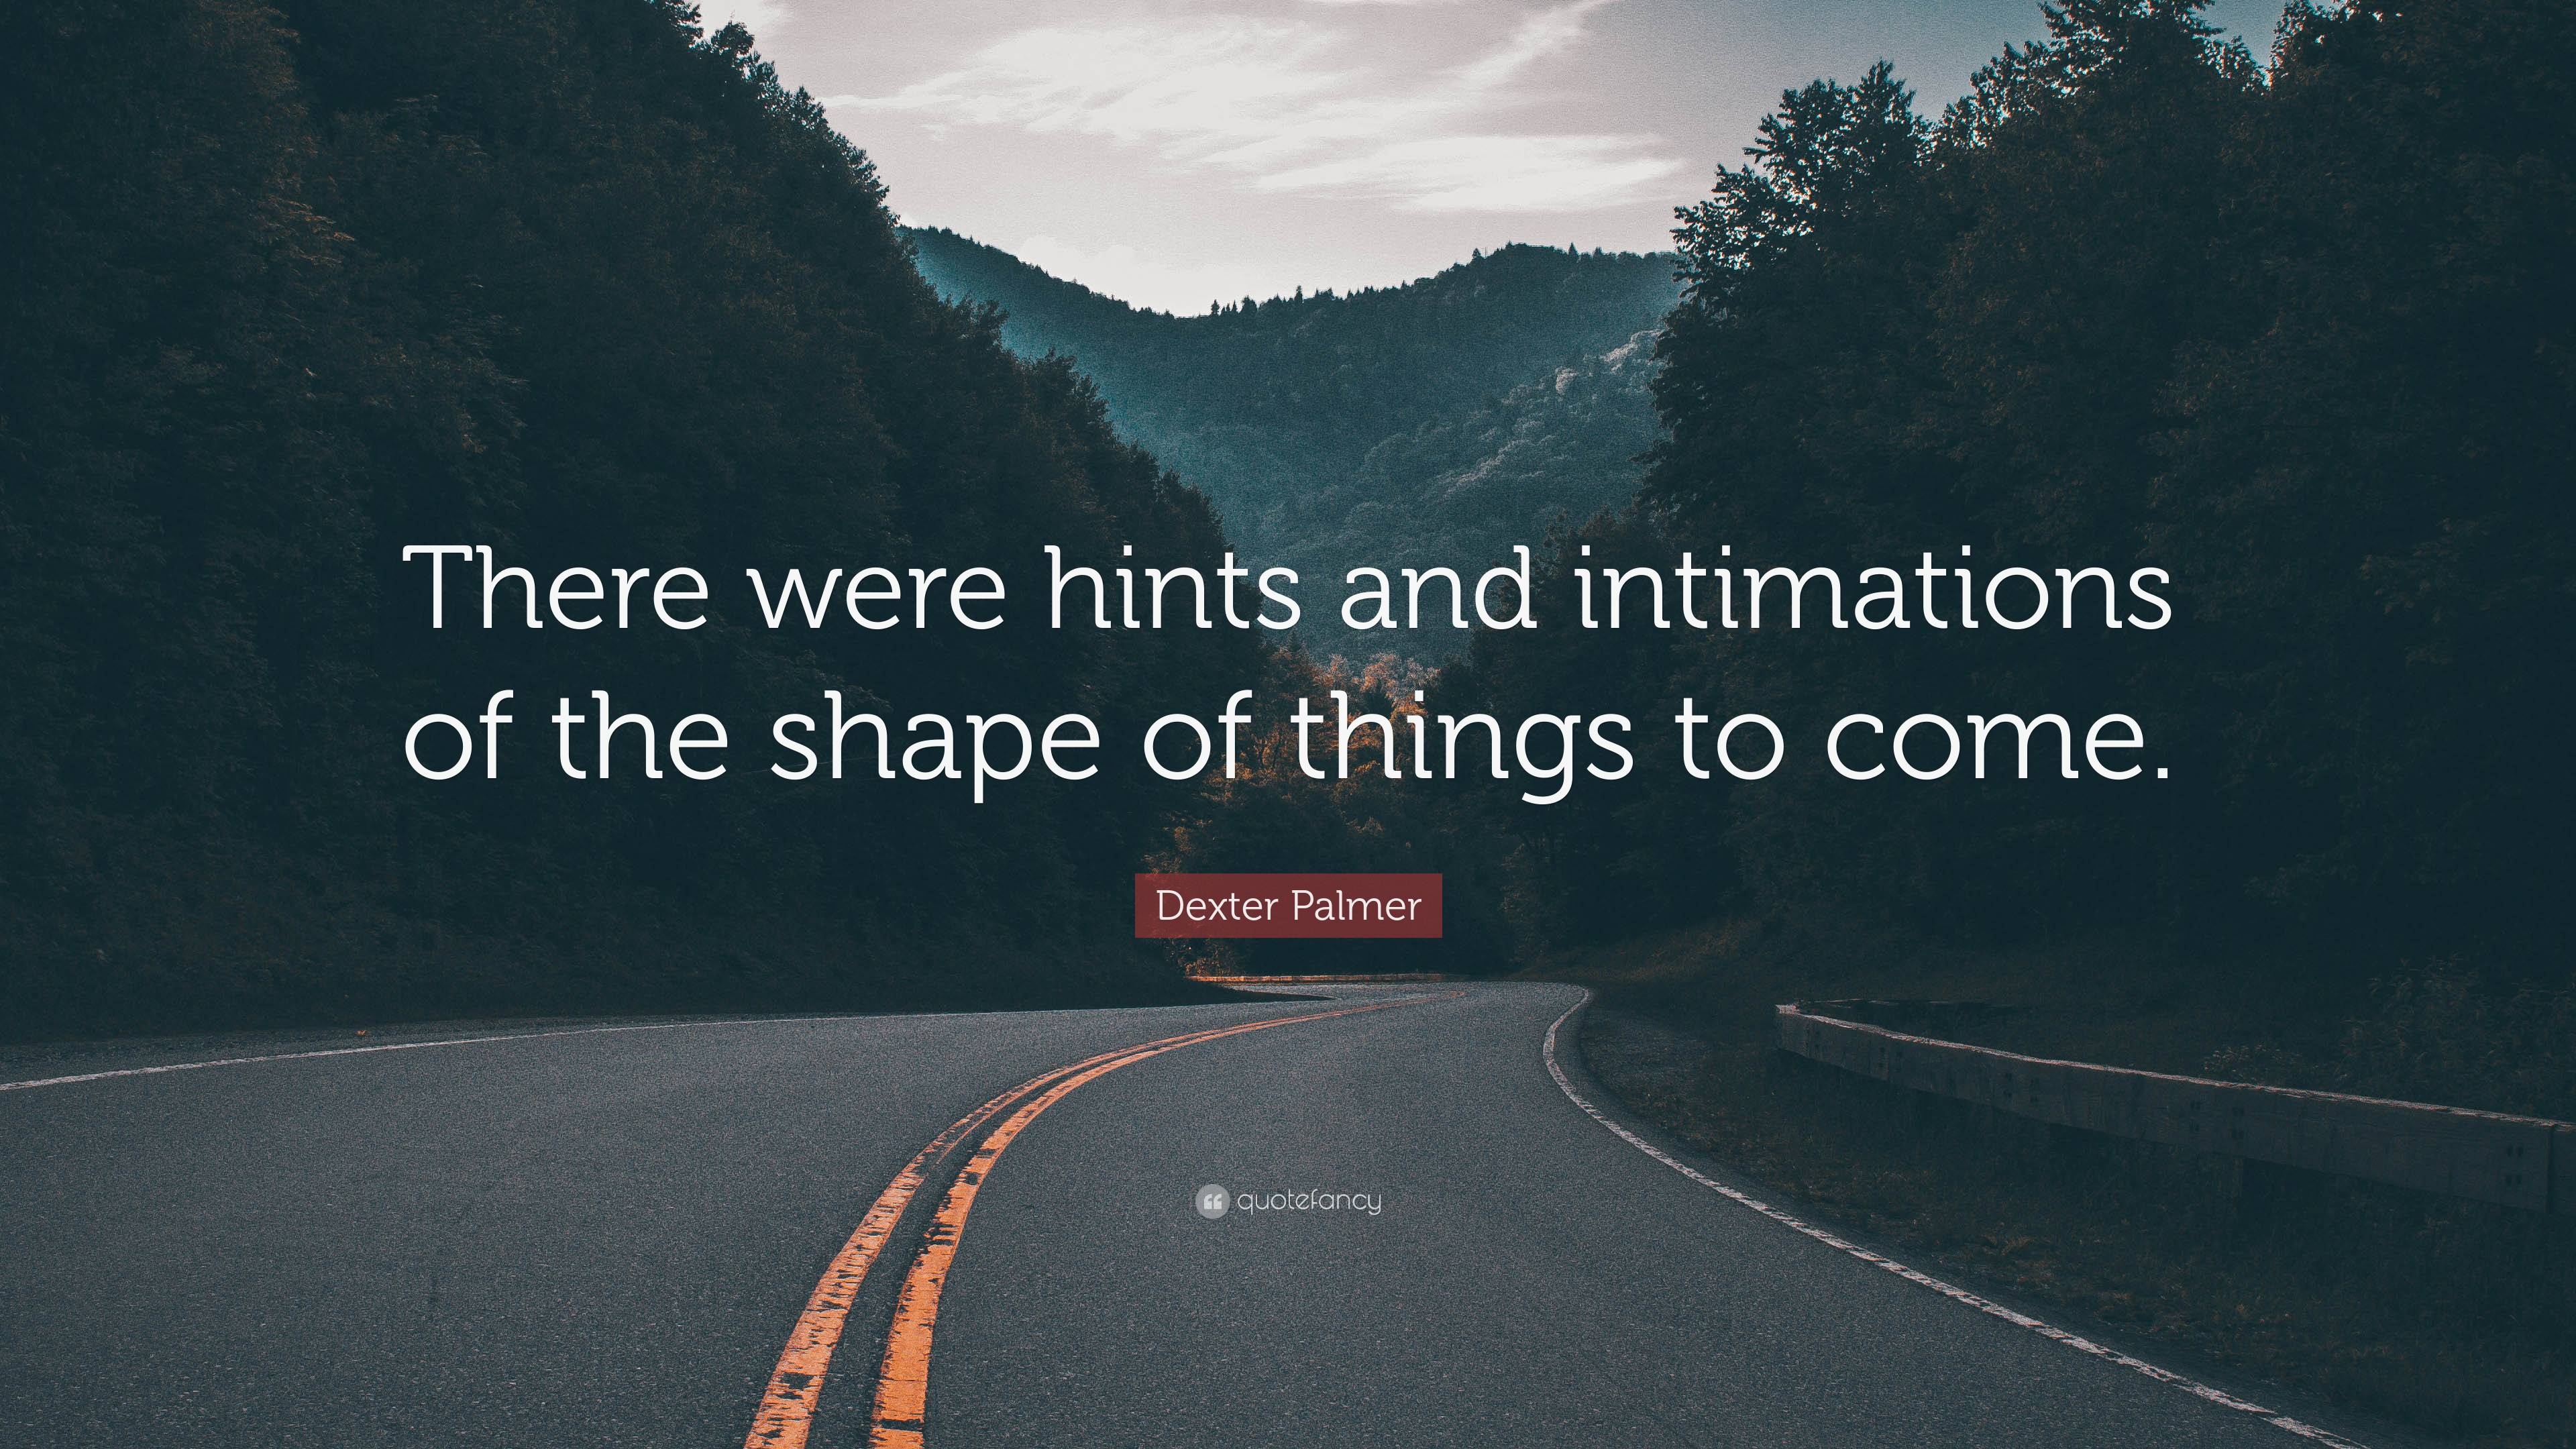 Dexter Palmer Quote: “There were hints and intimations of the